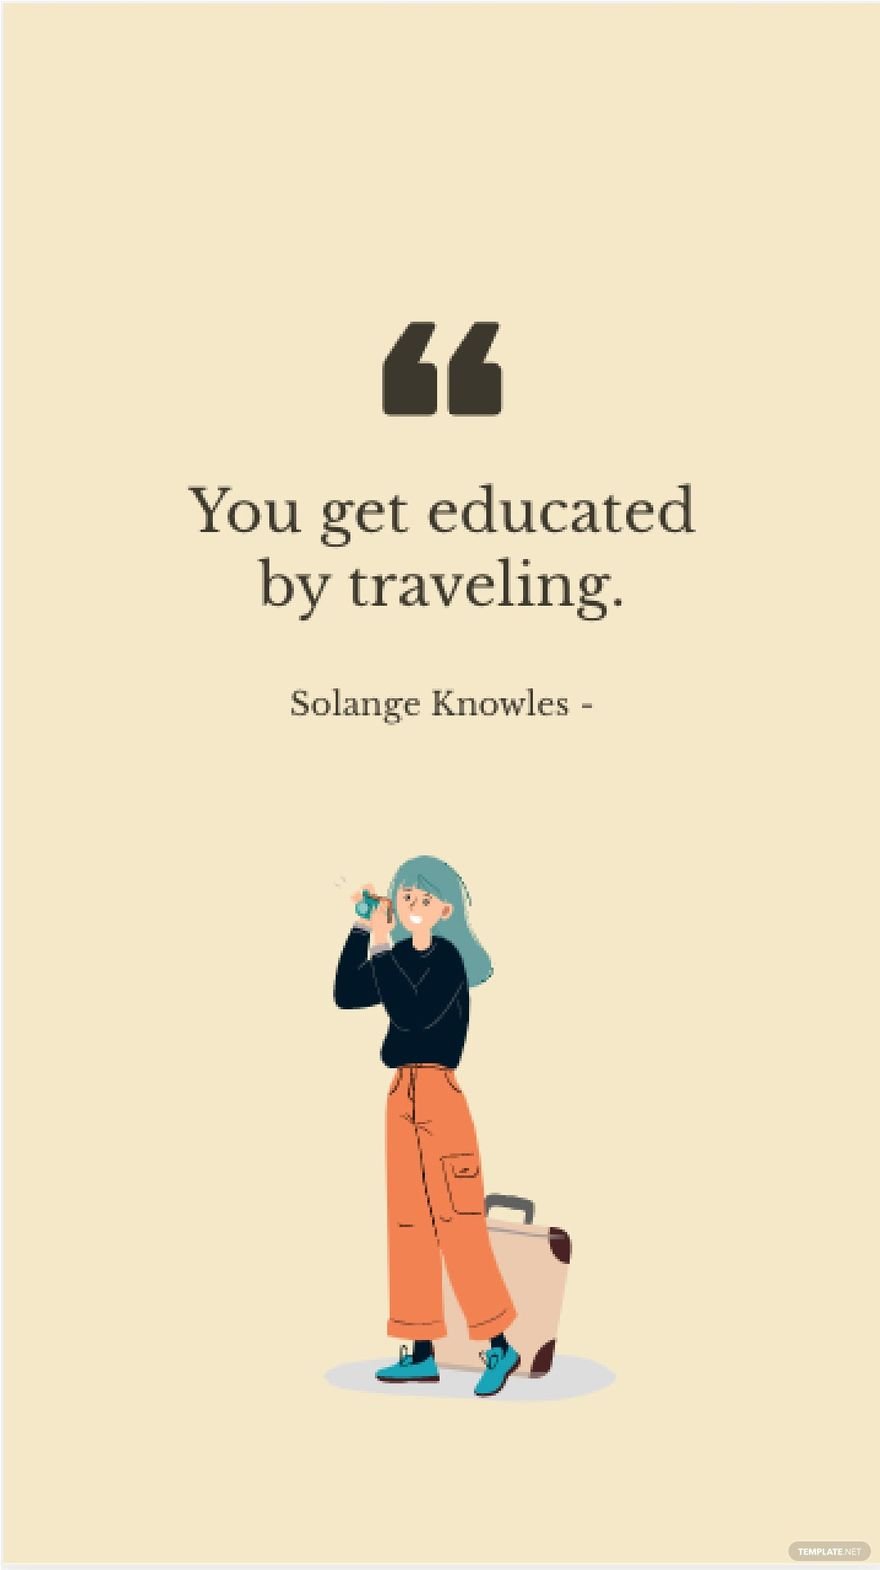 Solange Knowles - You get educated by traveling. in JPG